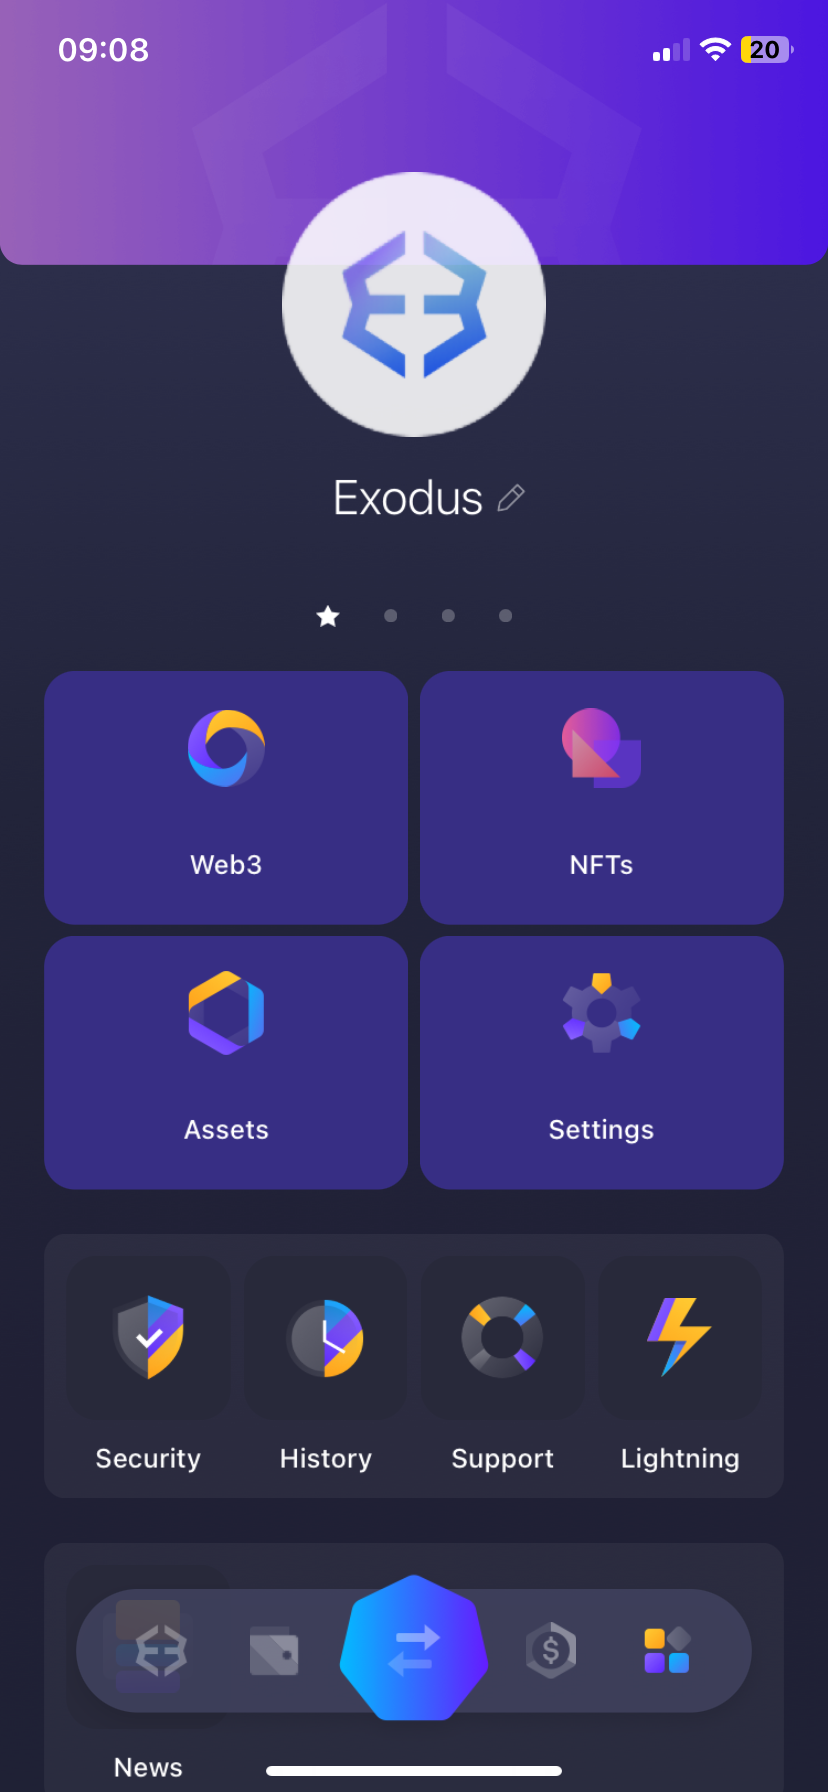 App page for exodus showing NFT marketplace